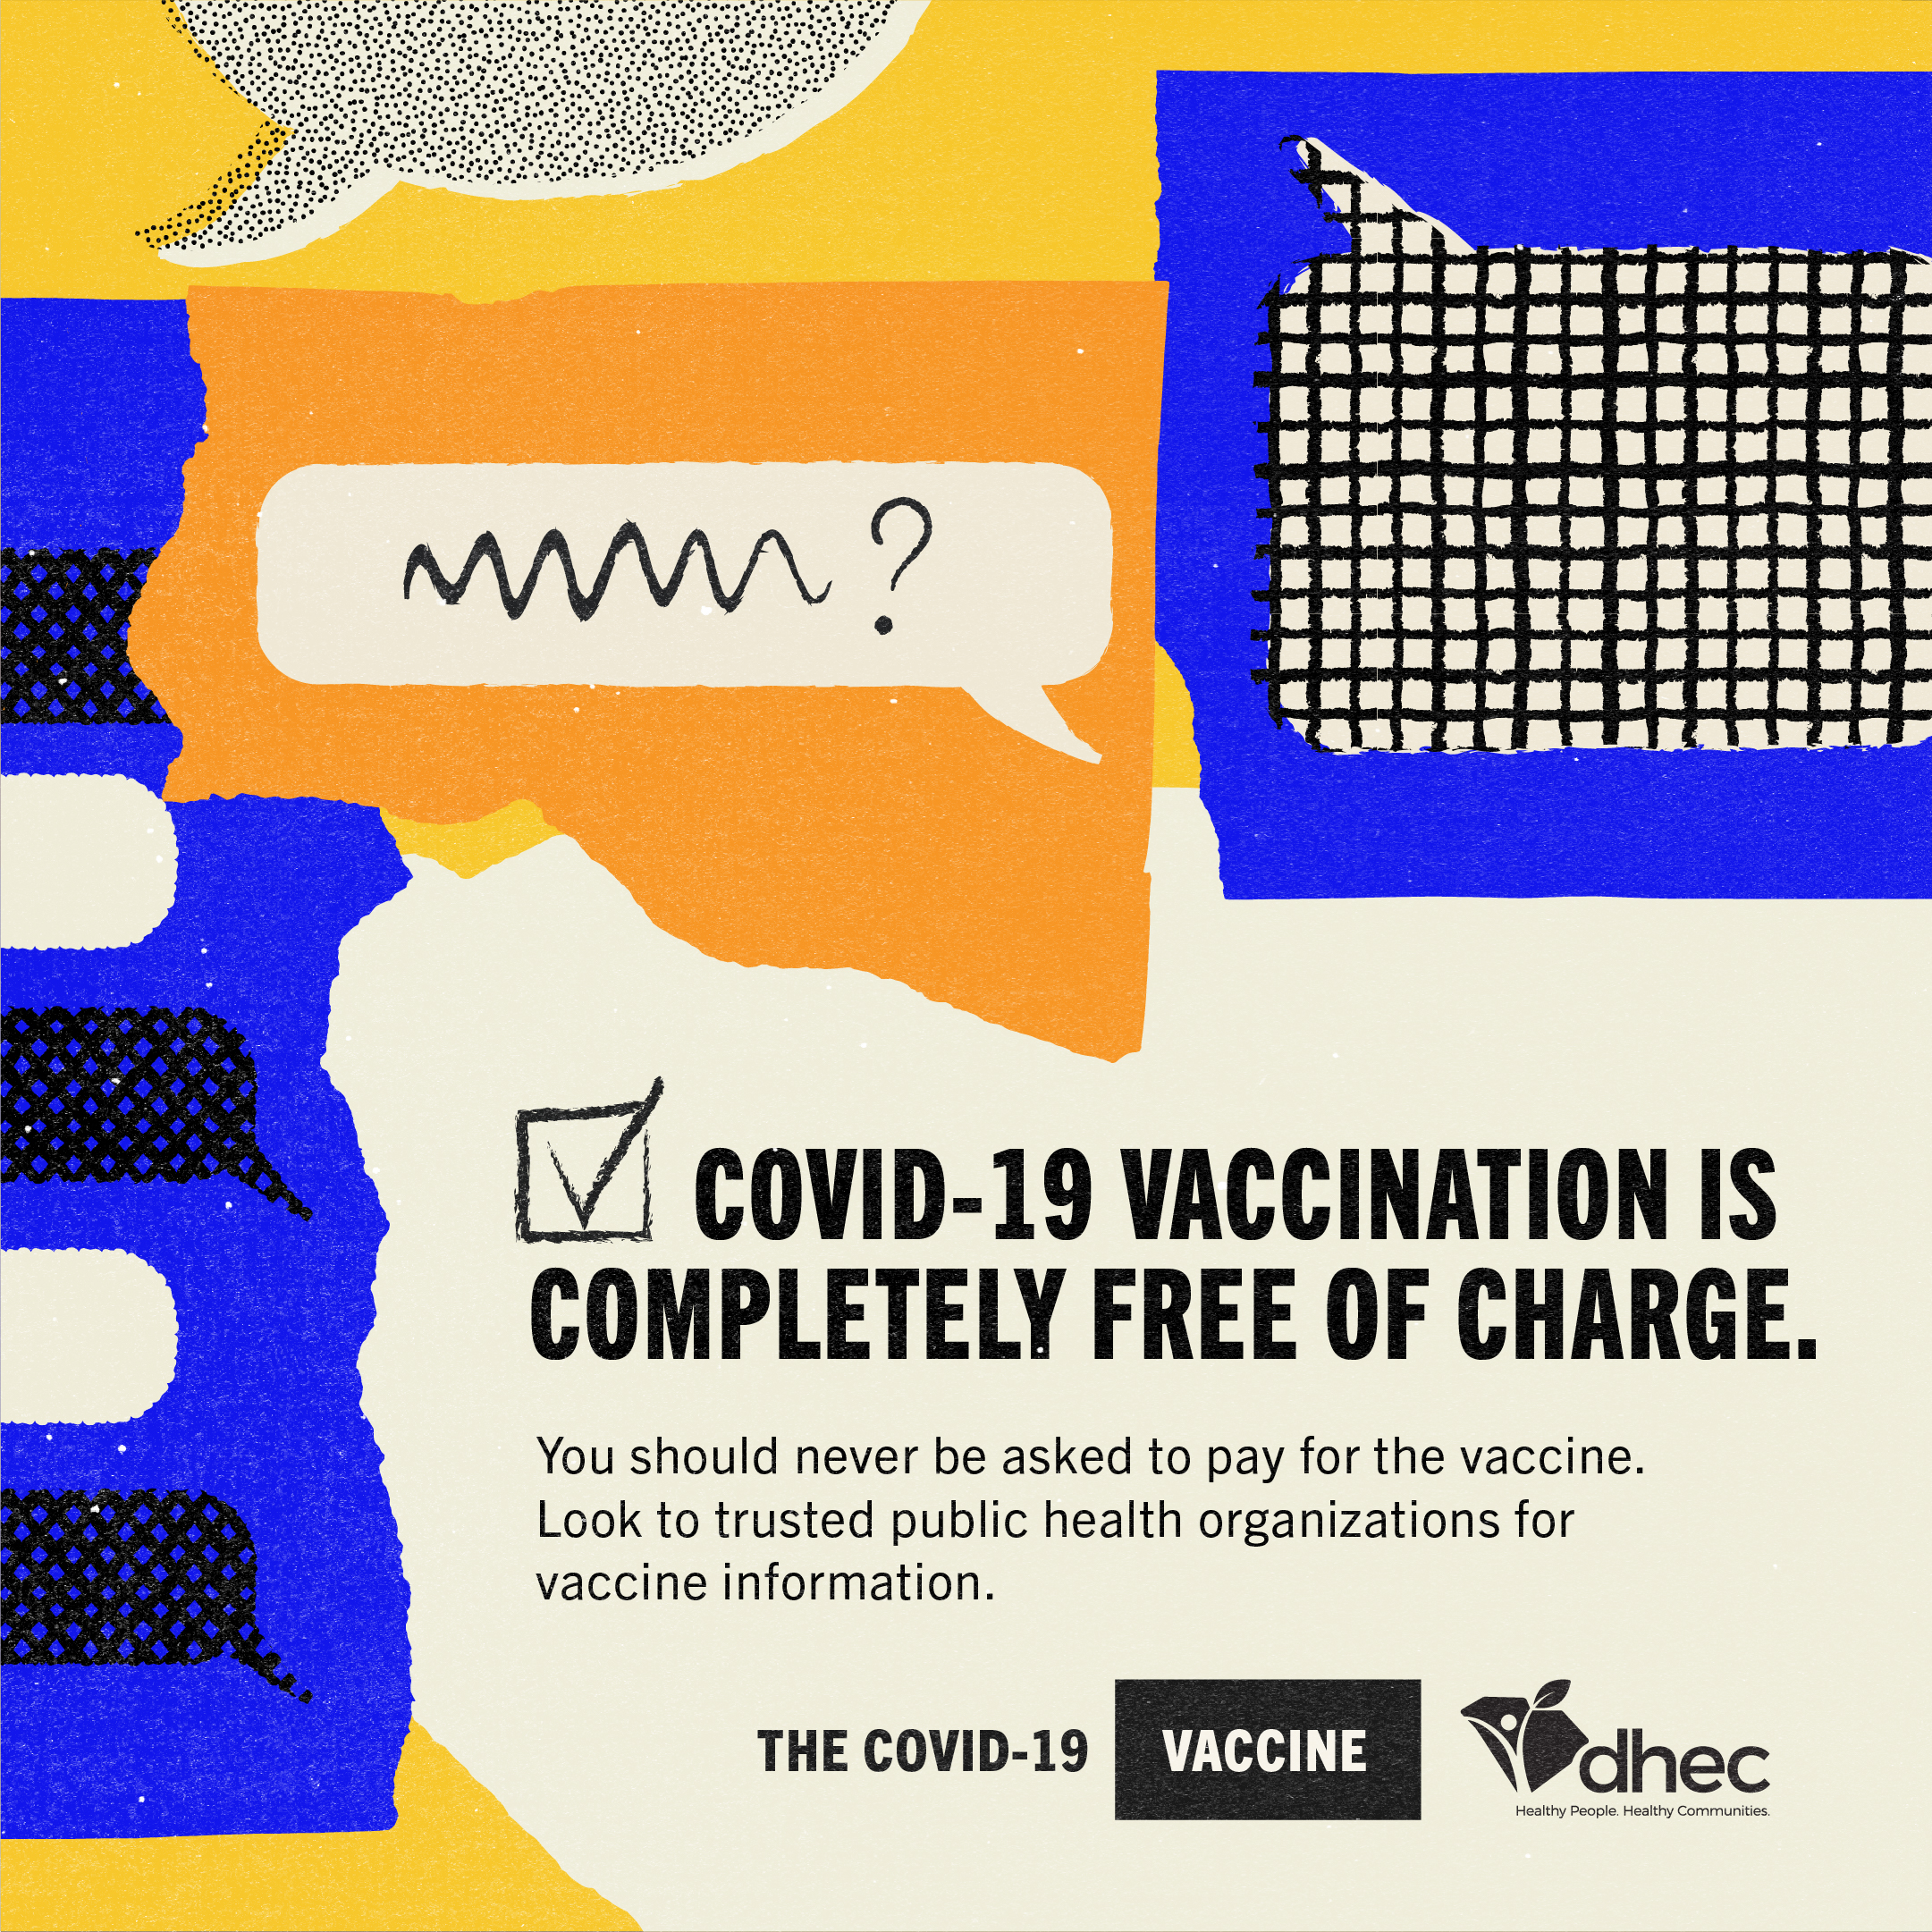 COVID-19 vaccination is completely free of charge.